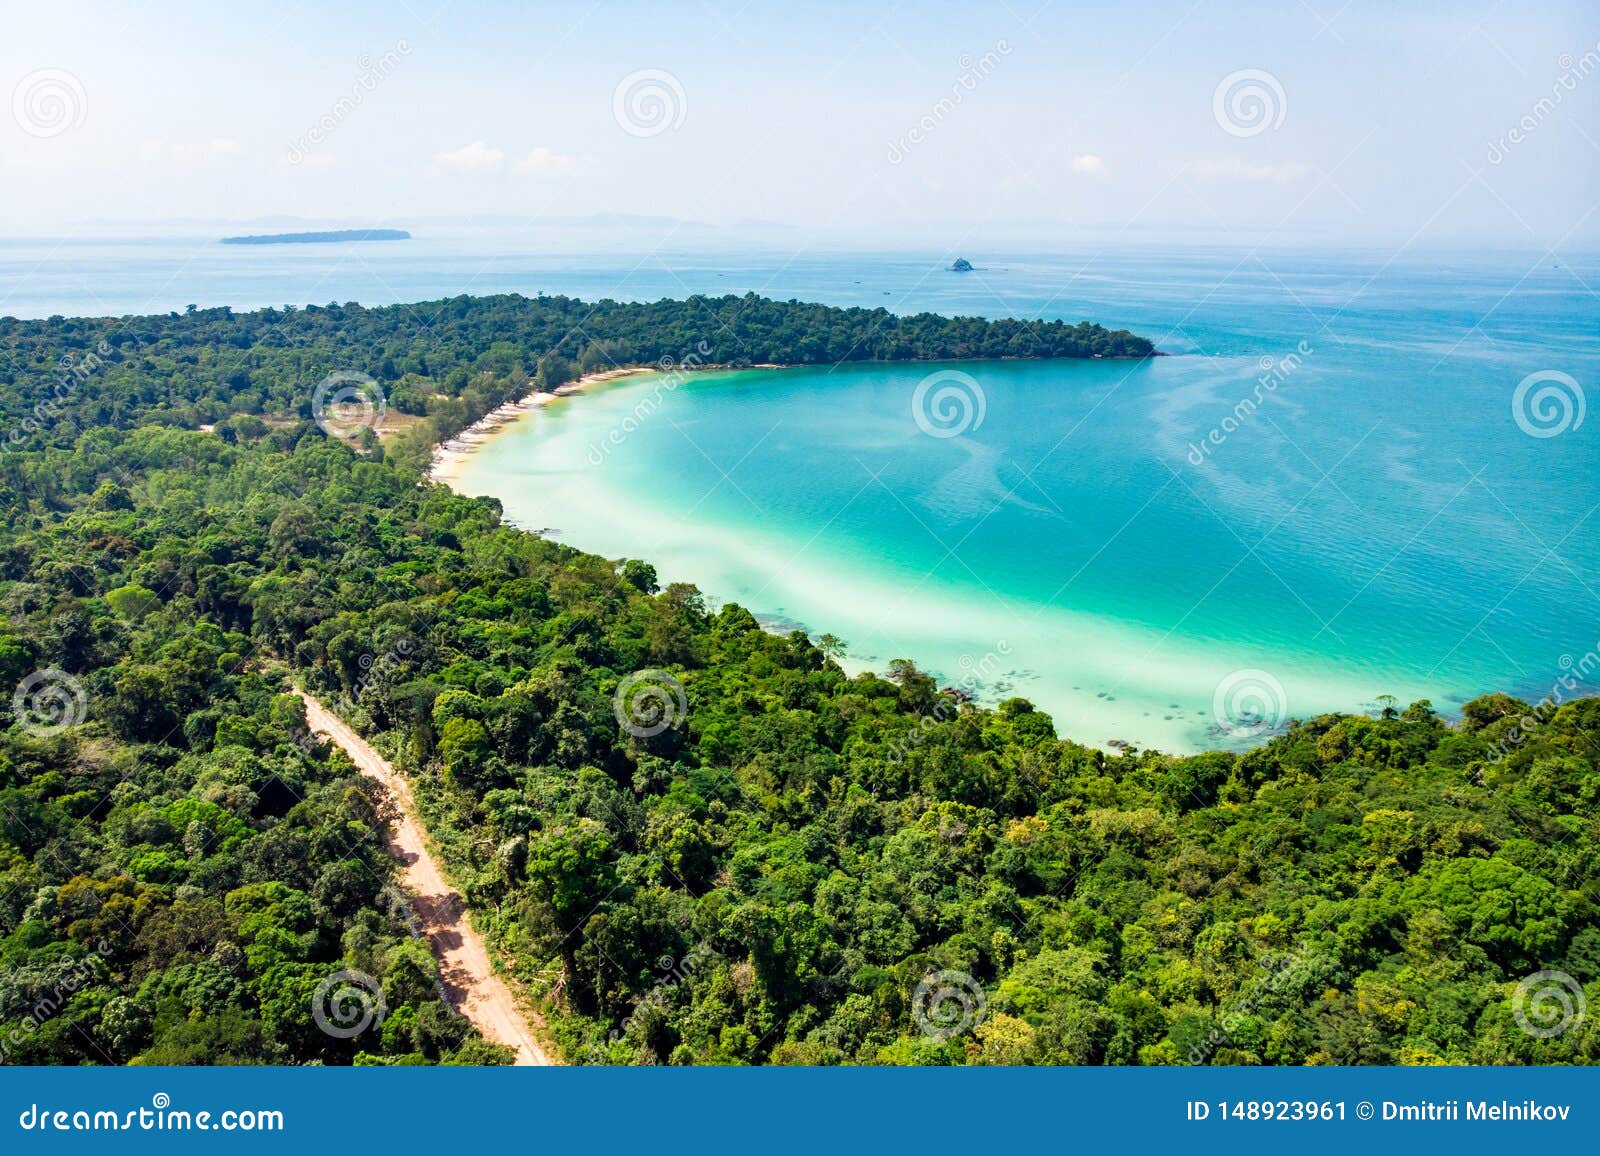 Top View Of A Beautiful Tropical Island With Dense Forest Or